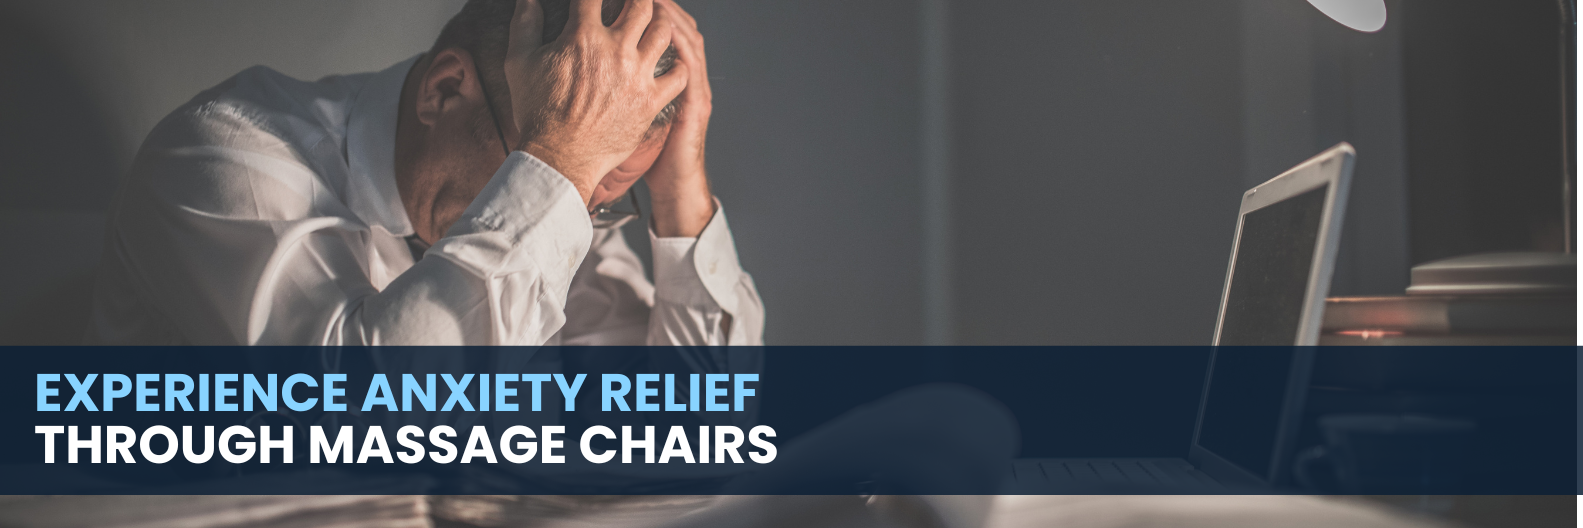 Experience Anxiety Relief Through Massage Chairs and gain insights into how massage chairs can effectively alleviate discomfort. 